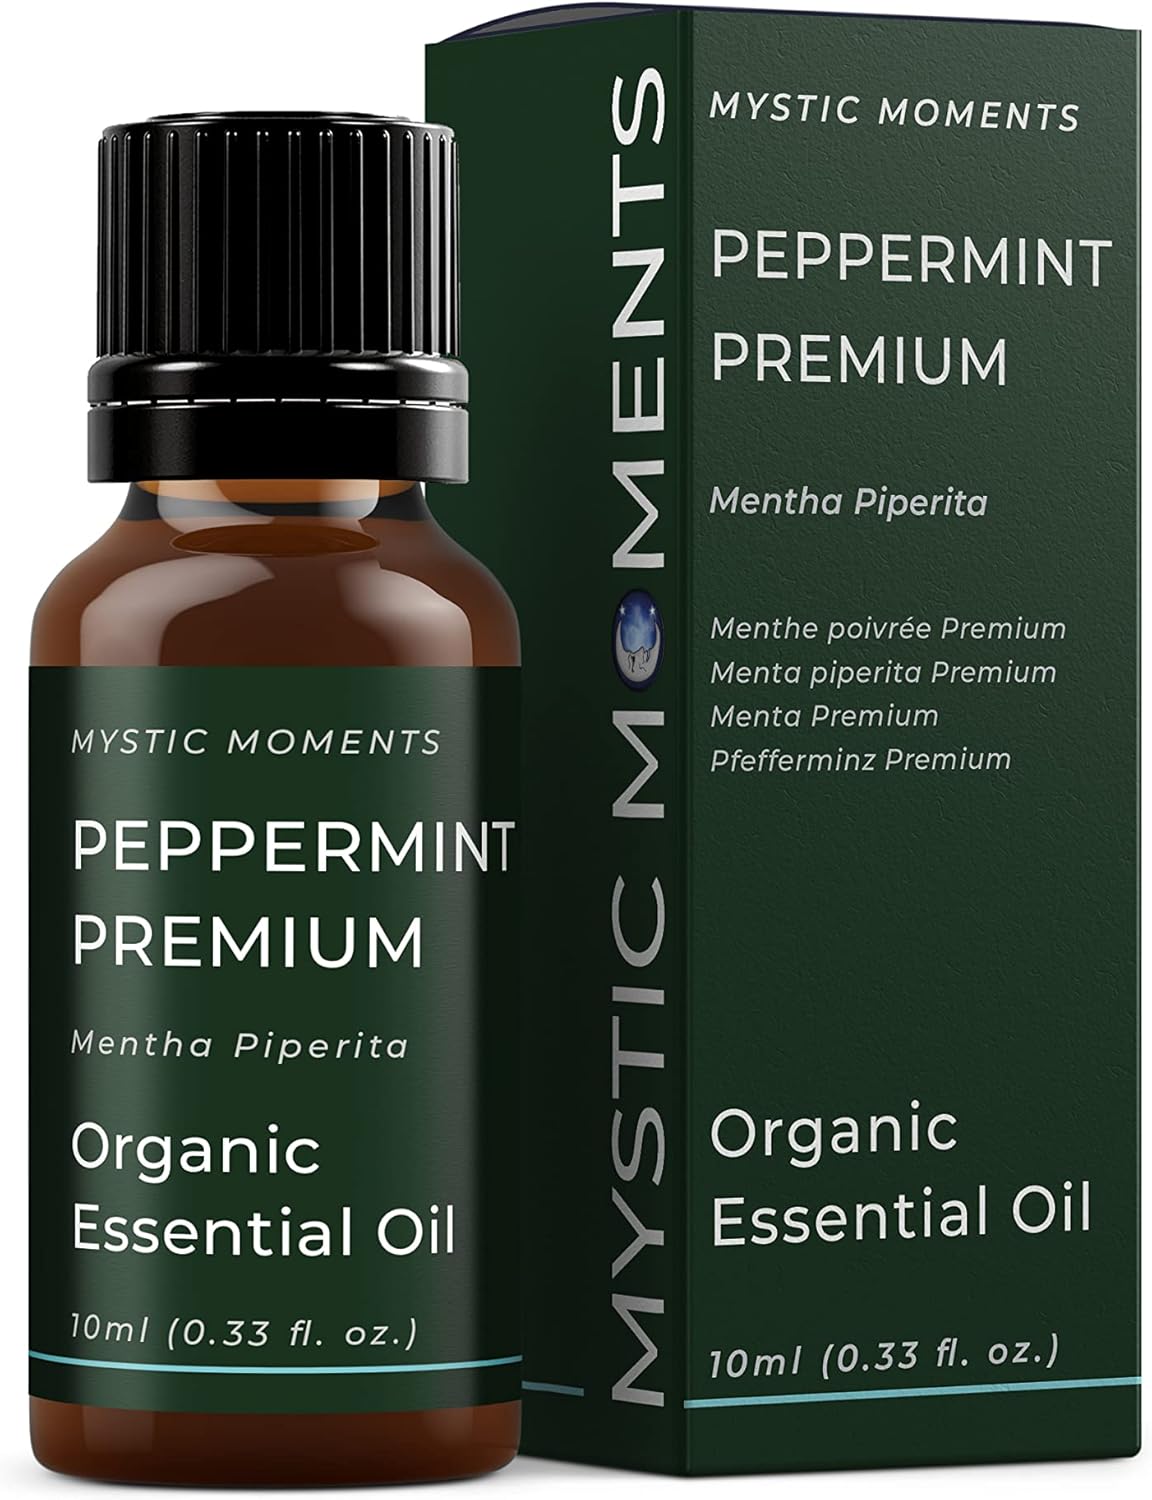 Mystic Moments | Organic Peppermint Arvensis Essential Oil 10ml - Pure & Natural oil for Diffusers, Aromatherapy & Massage Blends Vegan GMO Free